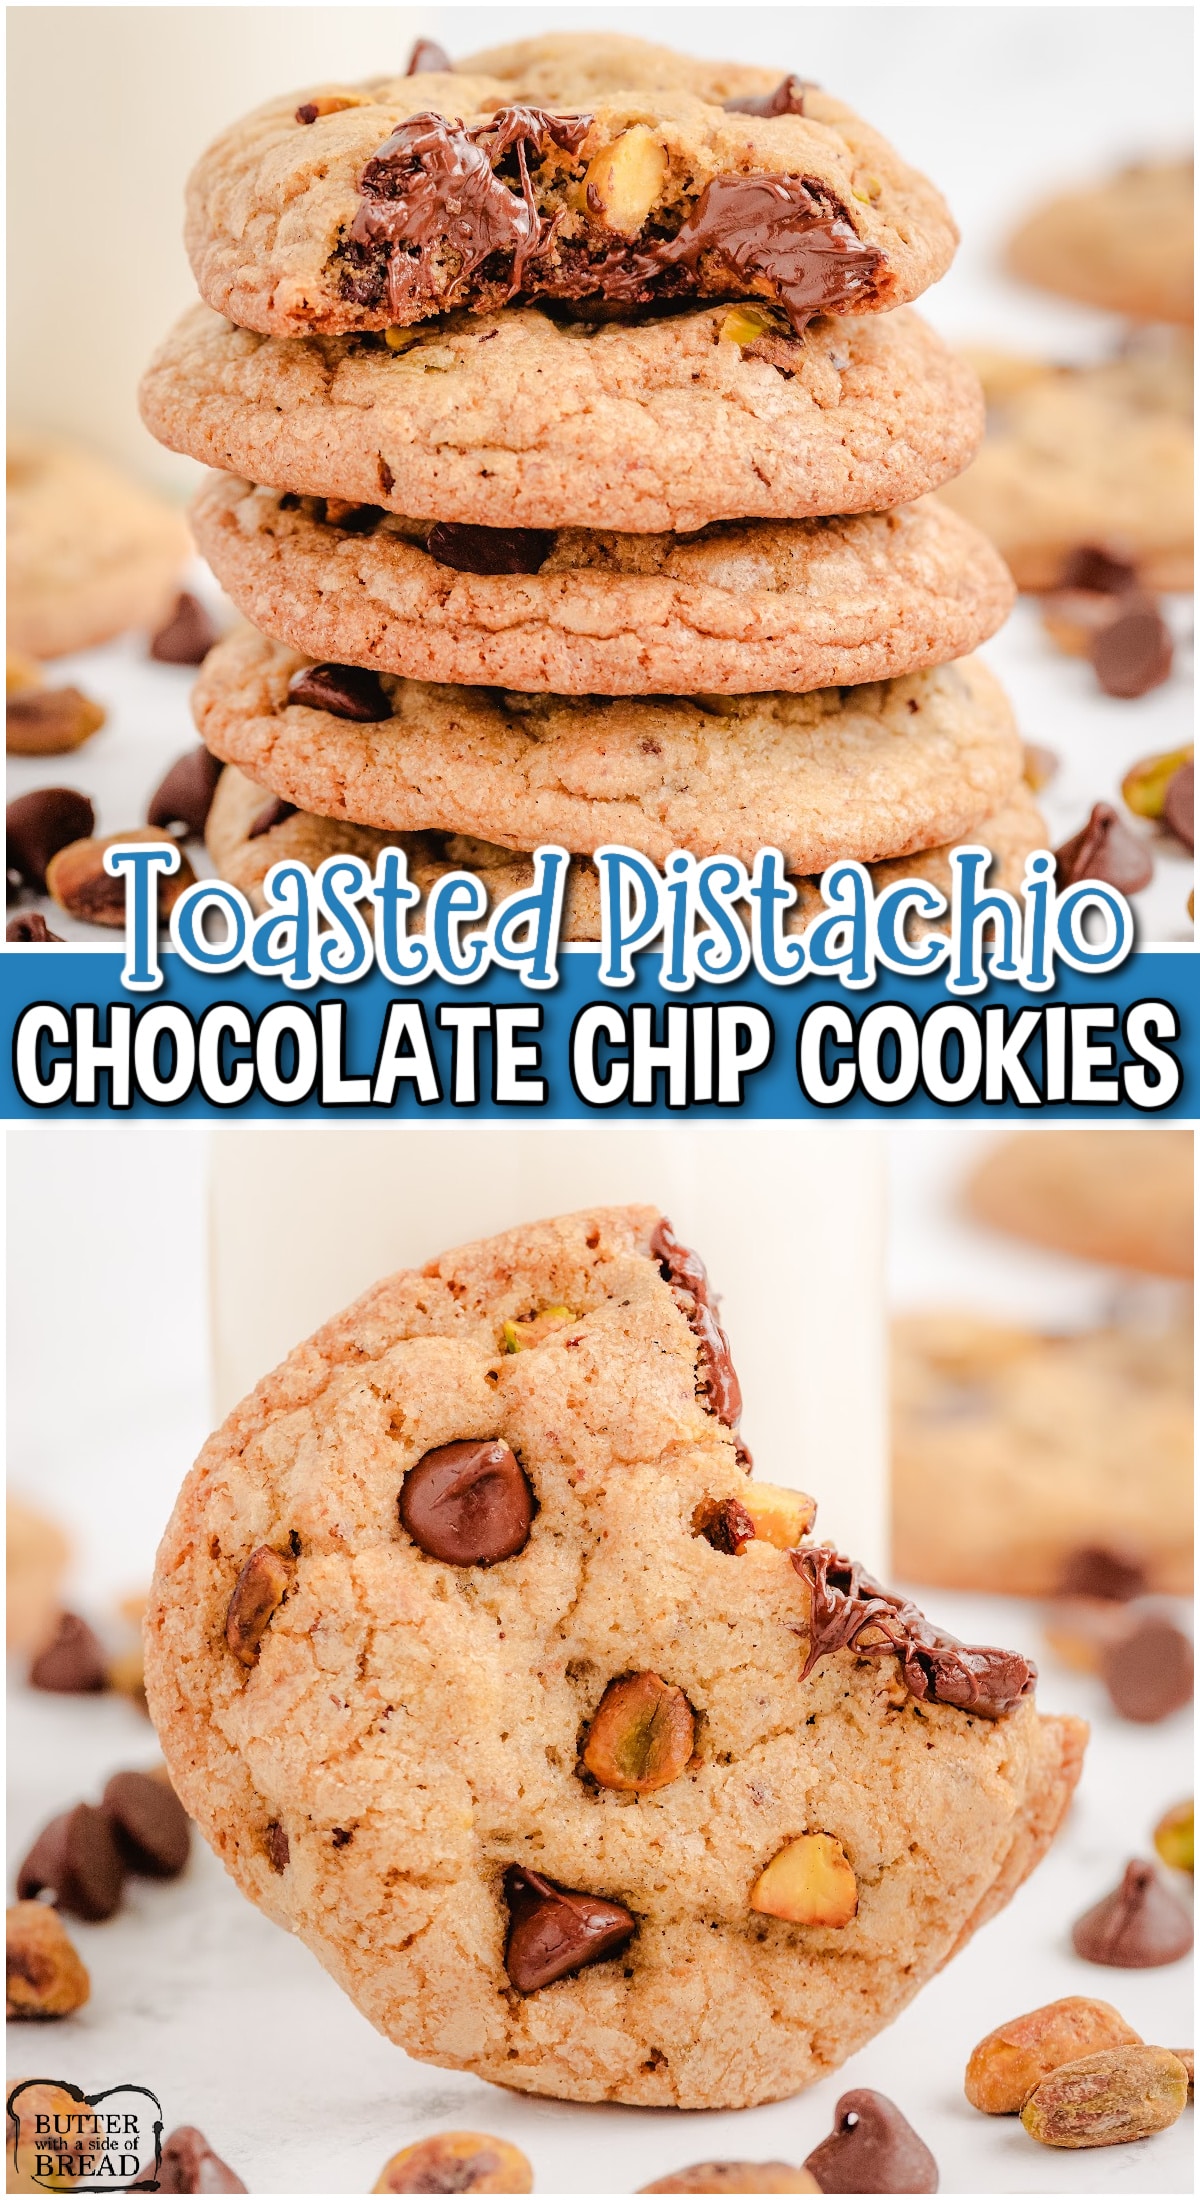 Toasted Pistachio Chocolate Chip Cookies are a unique twist on the classic chocolate chip cookie recipe! The addition adds a nutty flavor and crunchy texture, making these pistachio cookies a delightful treat!